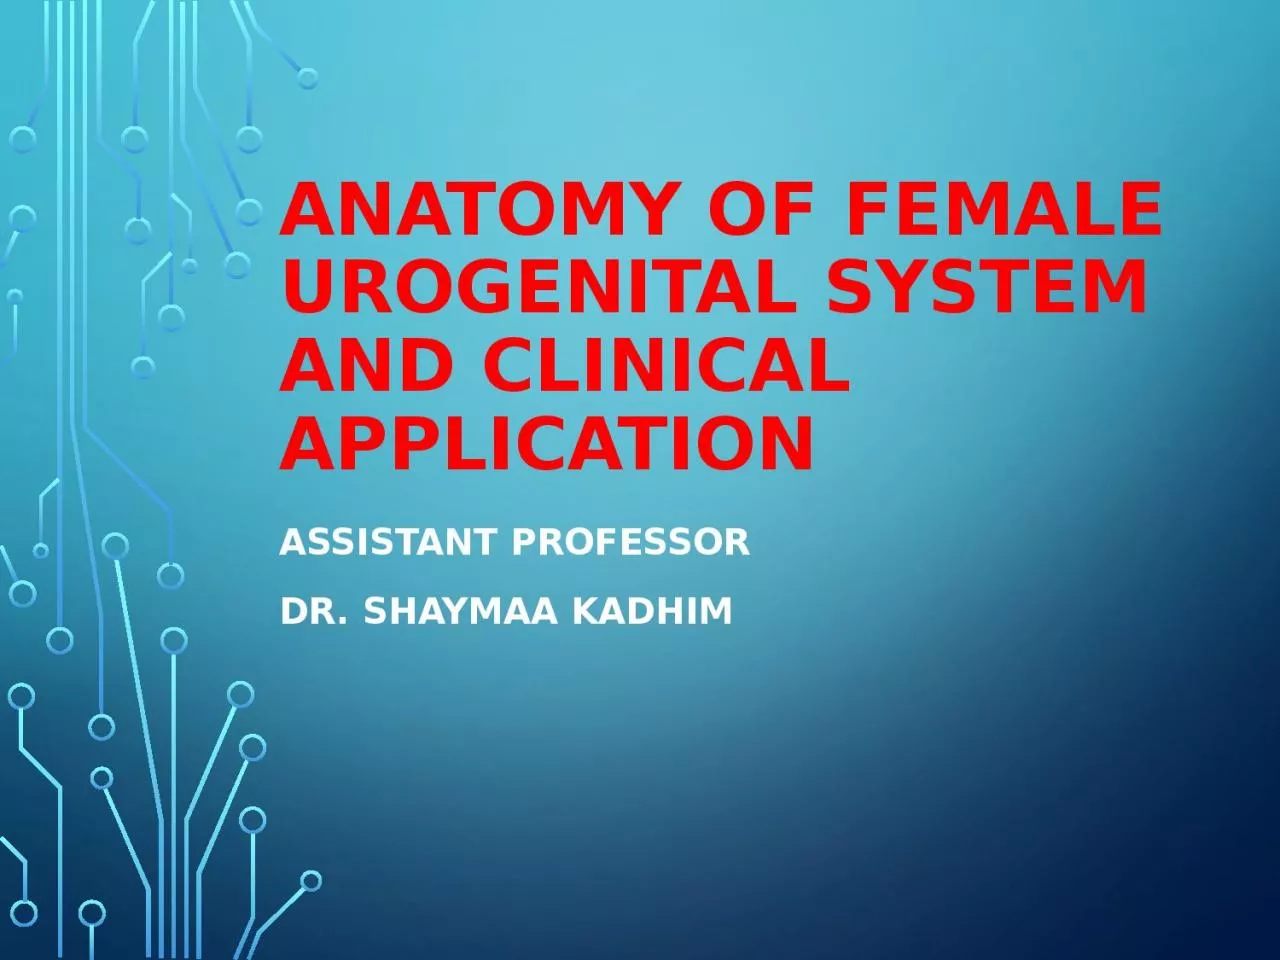 Anatomy of Female Urogenital System And Clinical Application